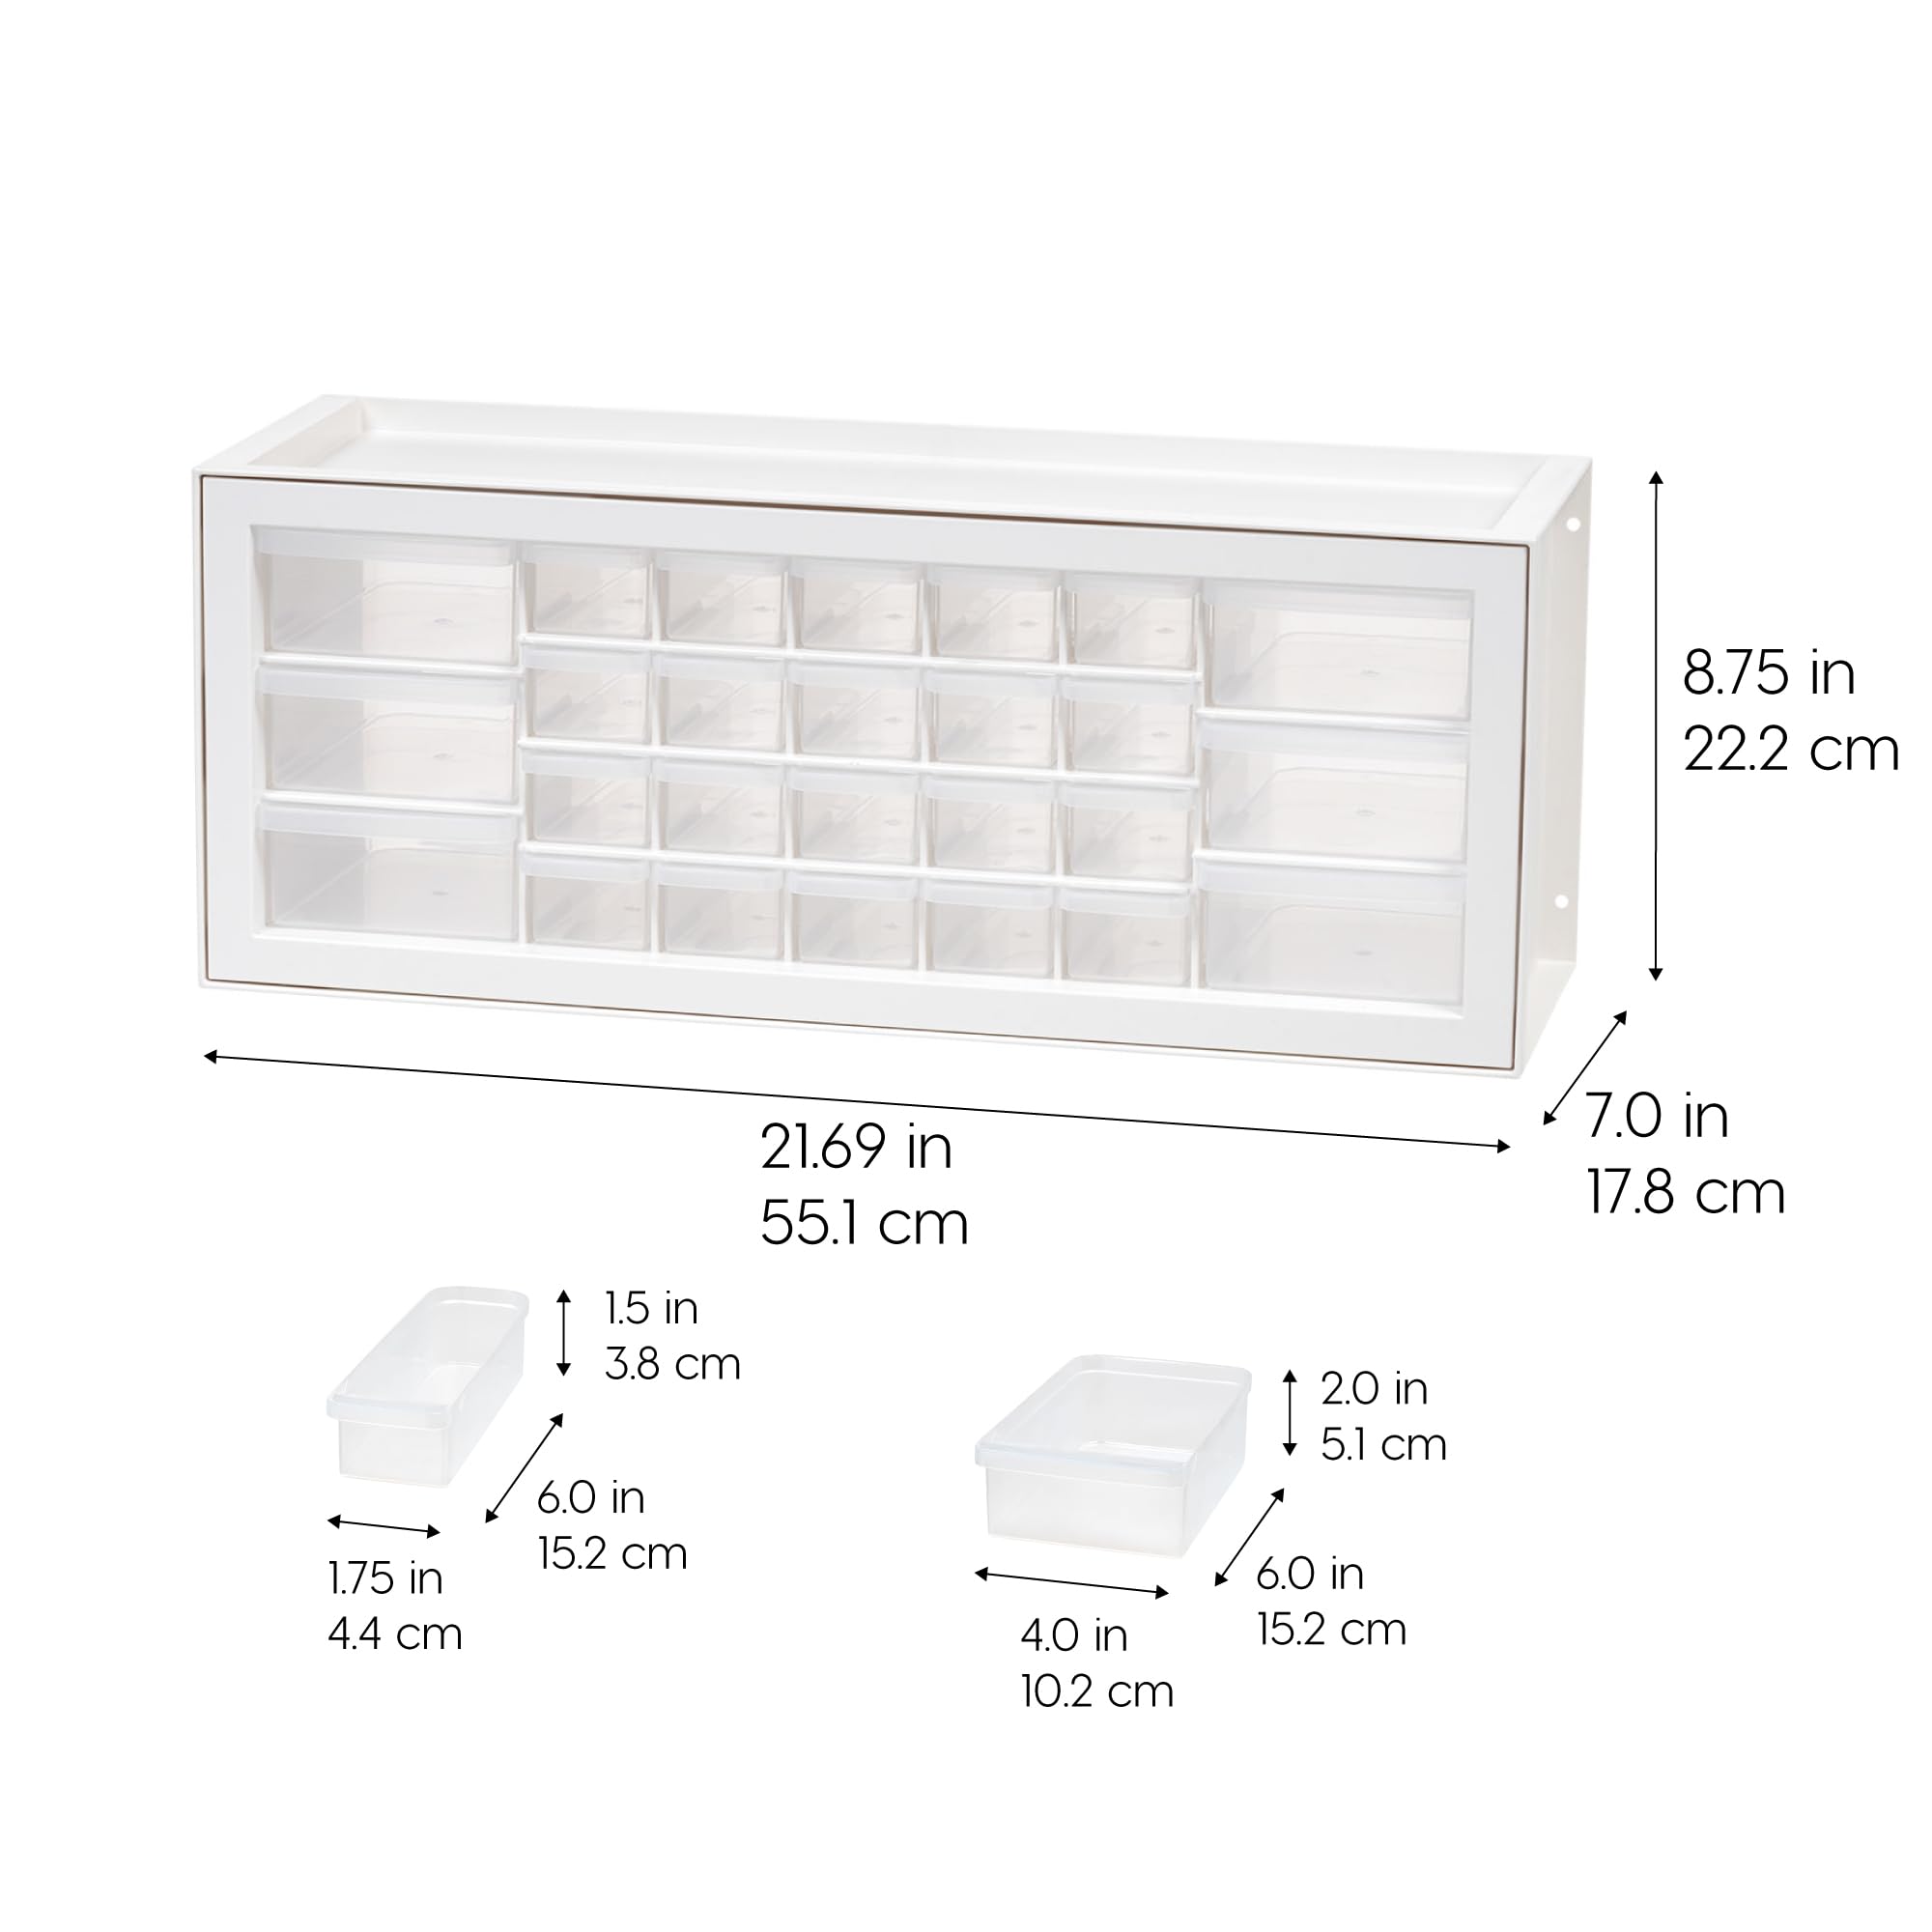 IRIS USA 26 Drawer Stackable Storage Cabinet for Hardware Crafts and Toys, 21.69-Inch W x 7-Inch D x 8.75-Inch H, White - Small Brick Organizer Utility Chest, Scrapbook Art Hobby Multiple Compartment